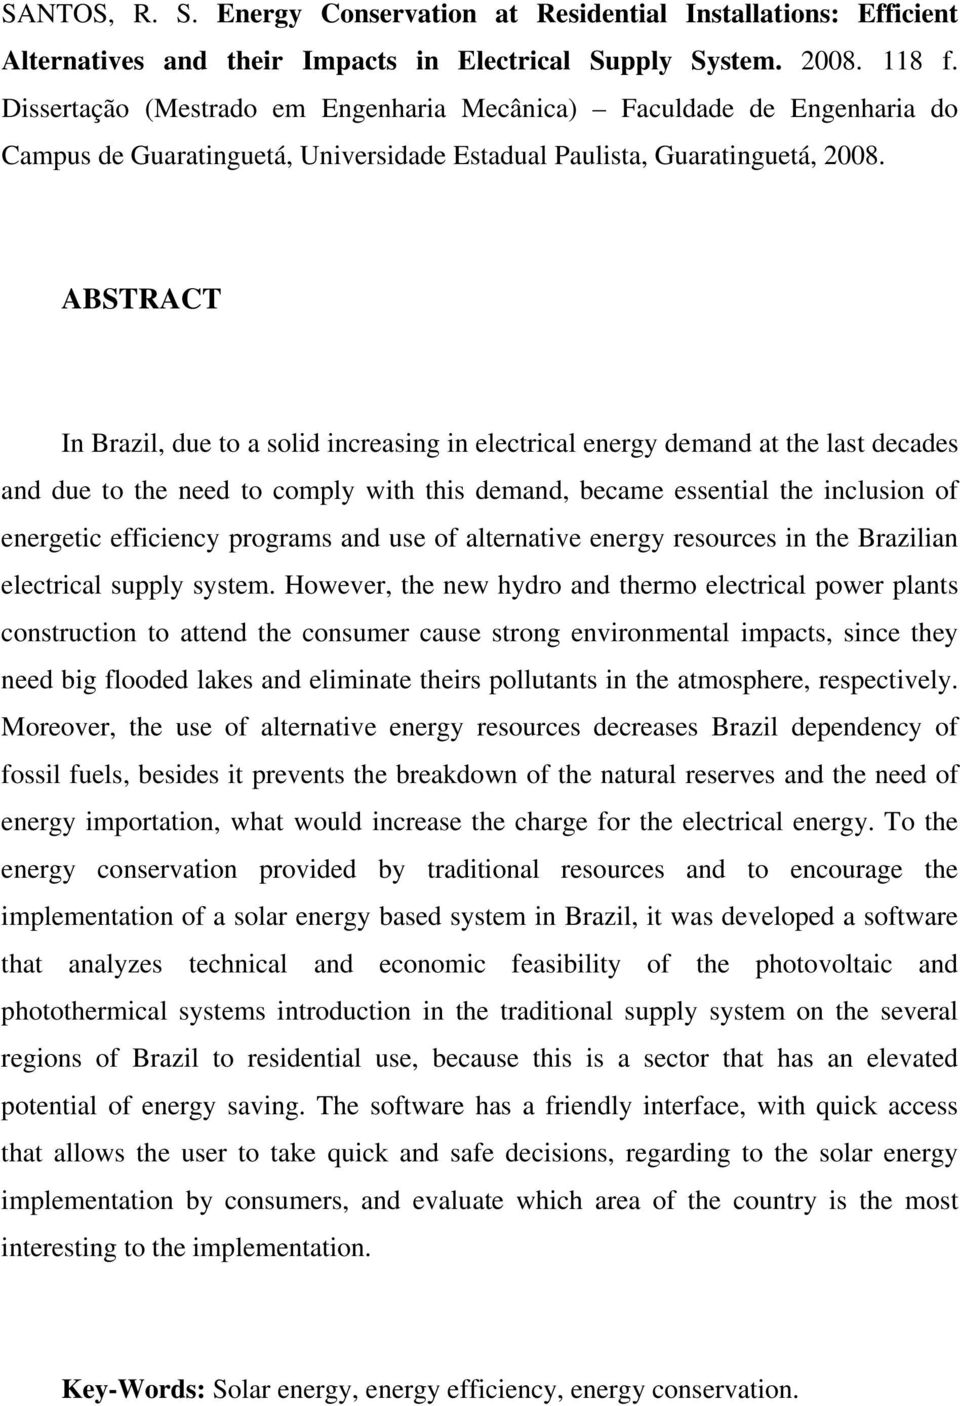 ABSTRACT In Brazil, due to a solid increasing in electrical energy demand at the last decades and due to the need to comply with this demand, became essential the inclusion of energetic efficiency